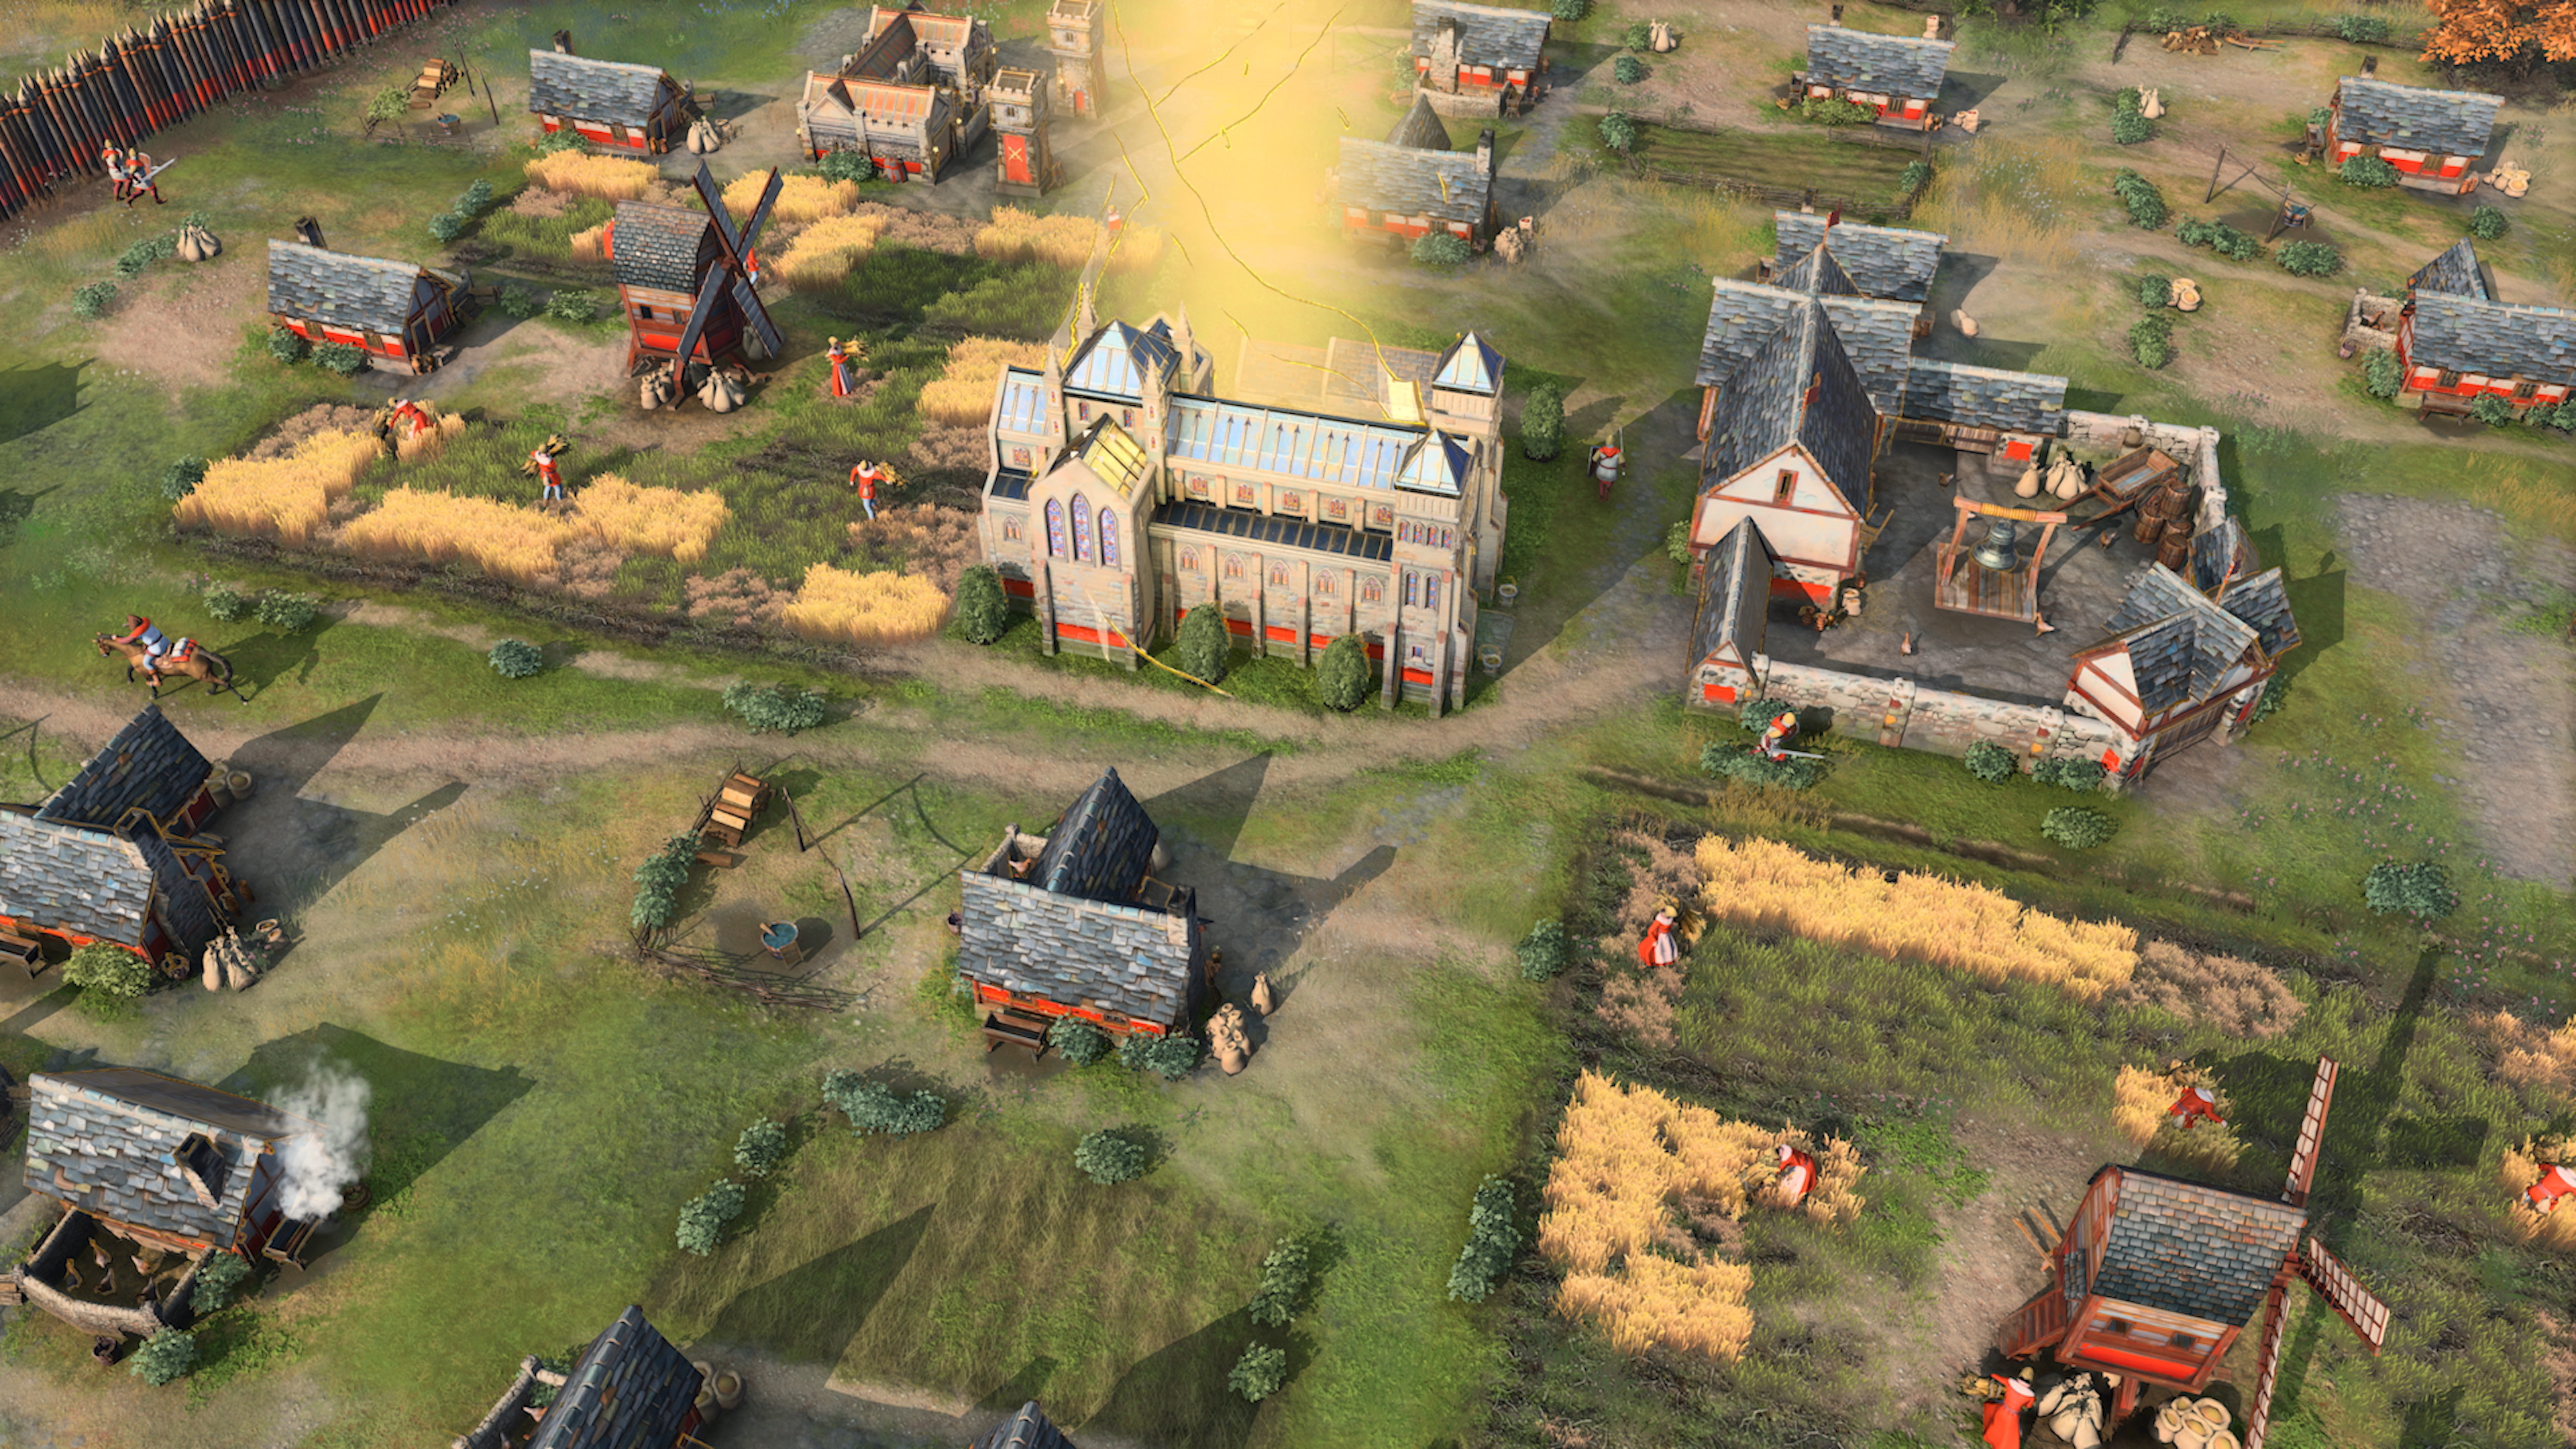 Age of Empires 4 gameplay featuring a cathedral